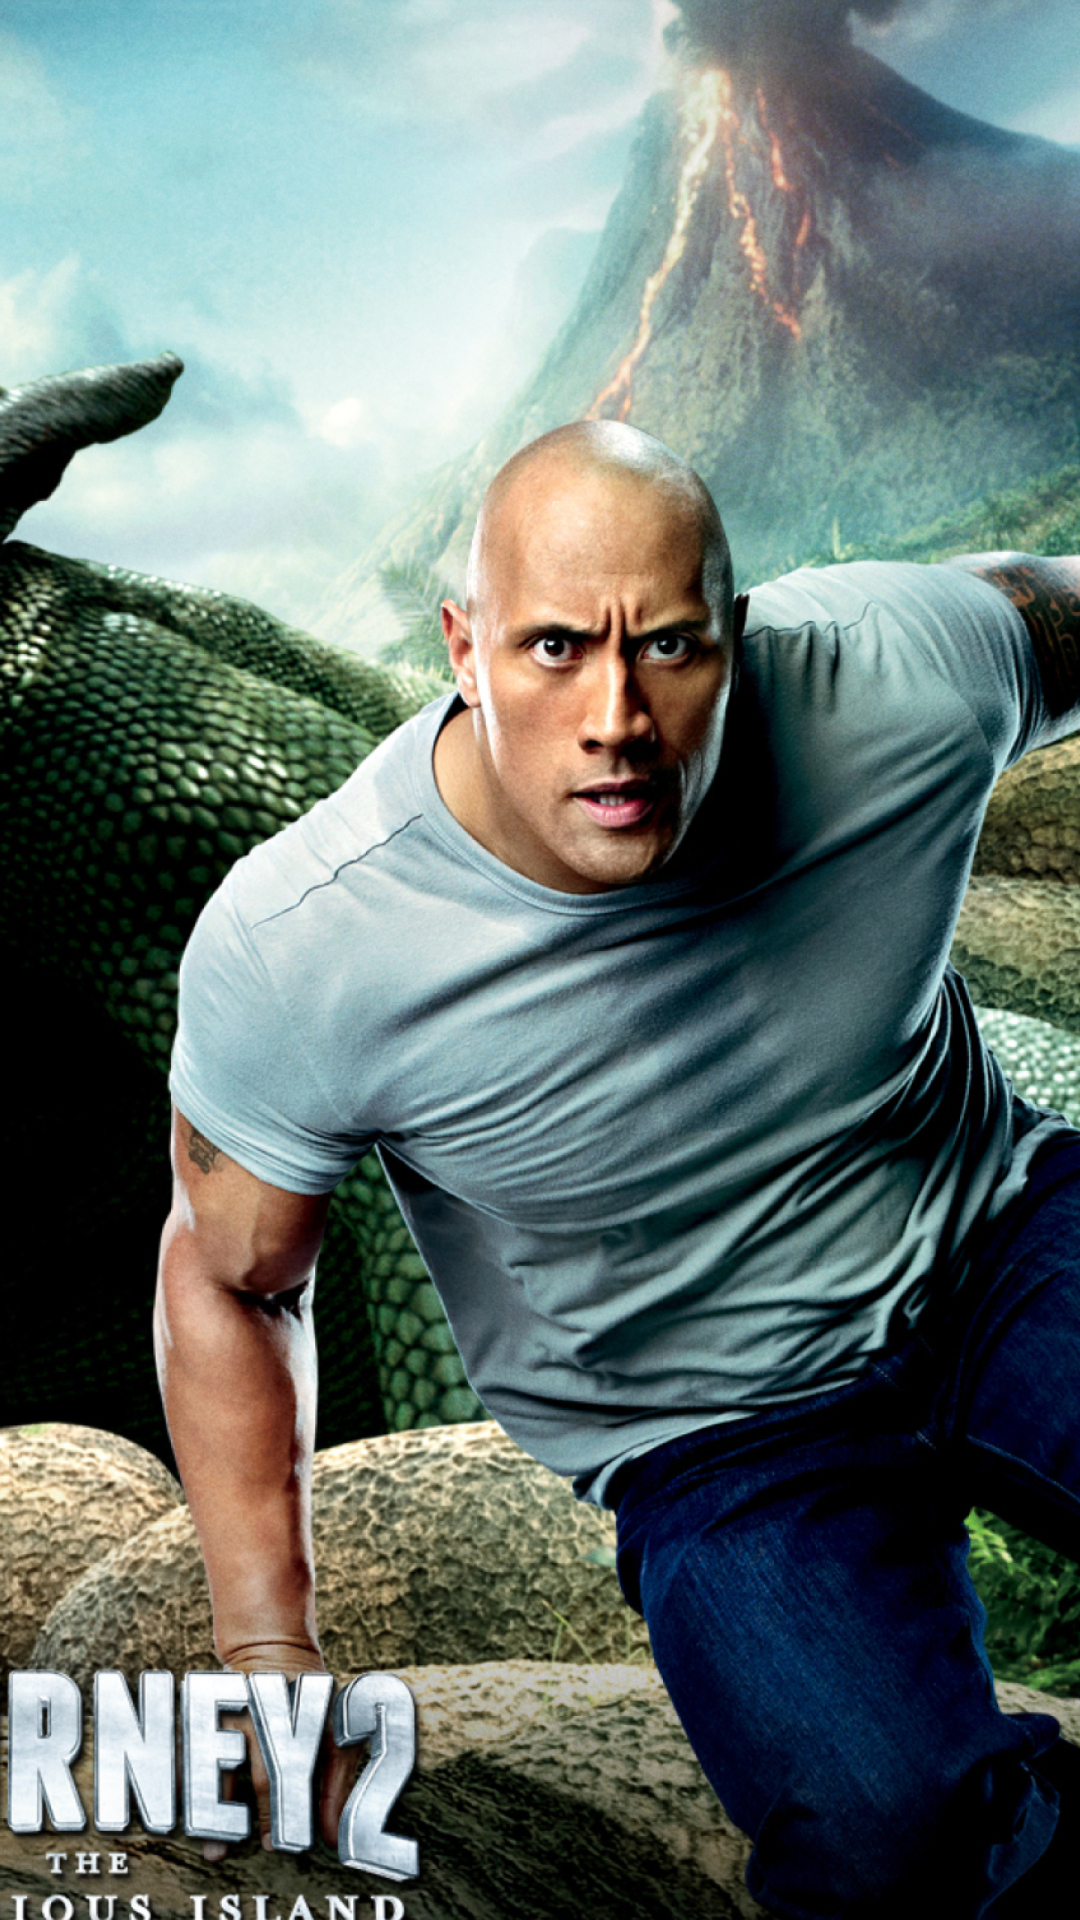 Dwayne Johnson In Journey 2: The Mysterious Island wallpaper 1080x1920